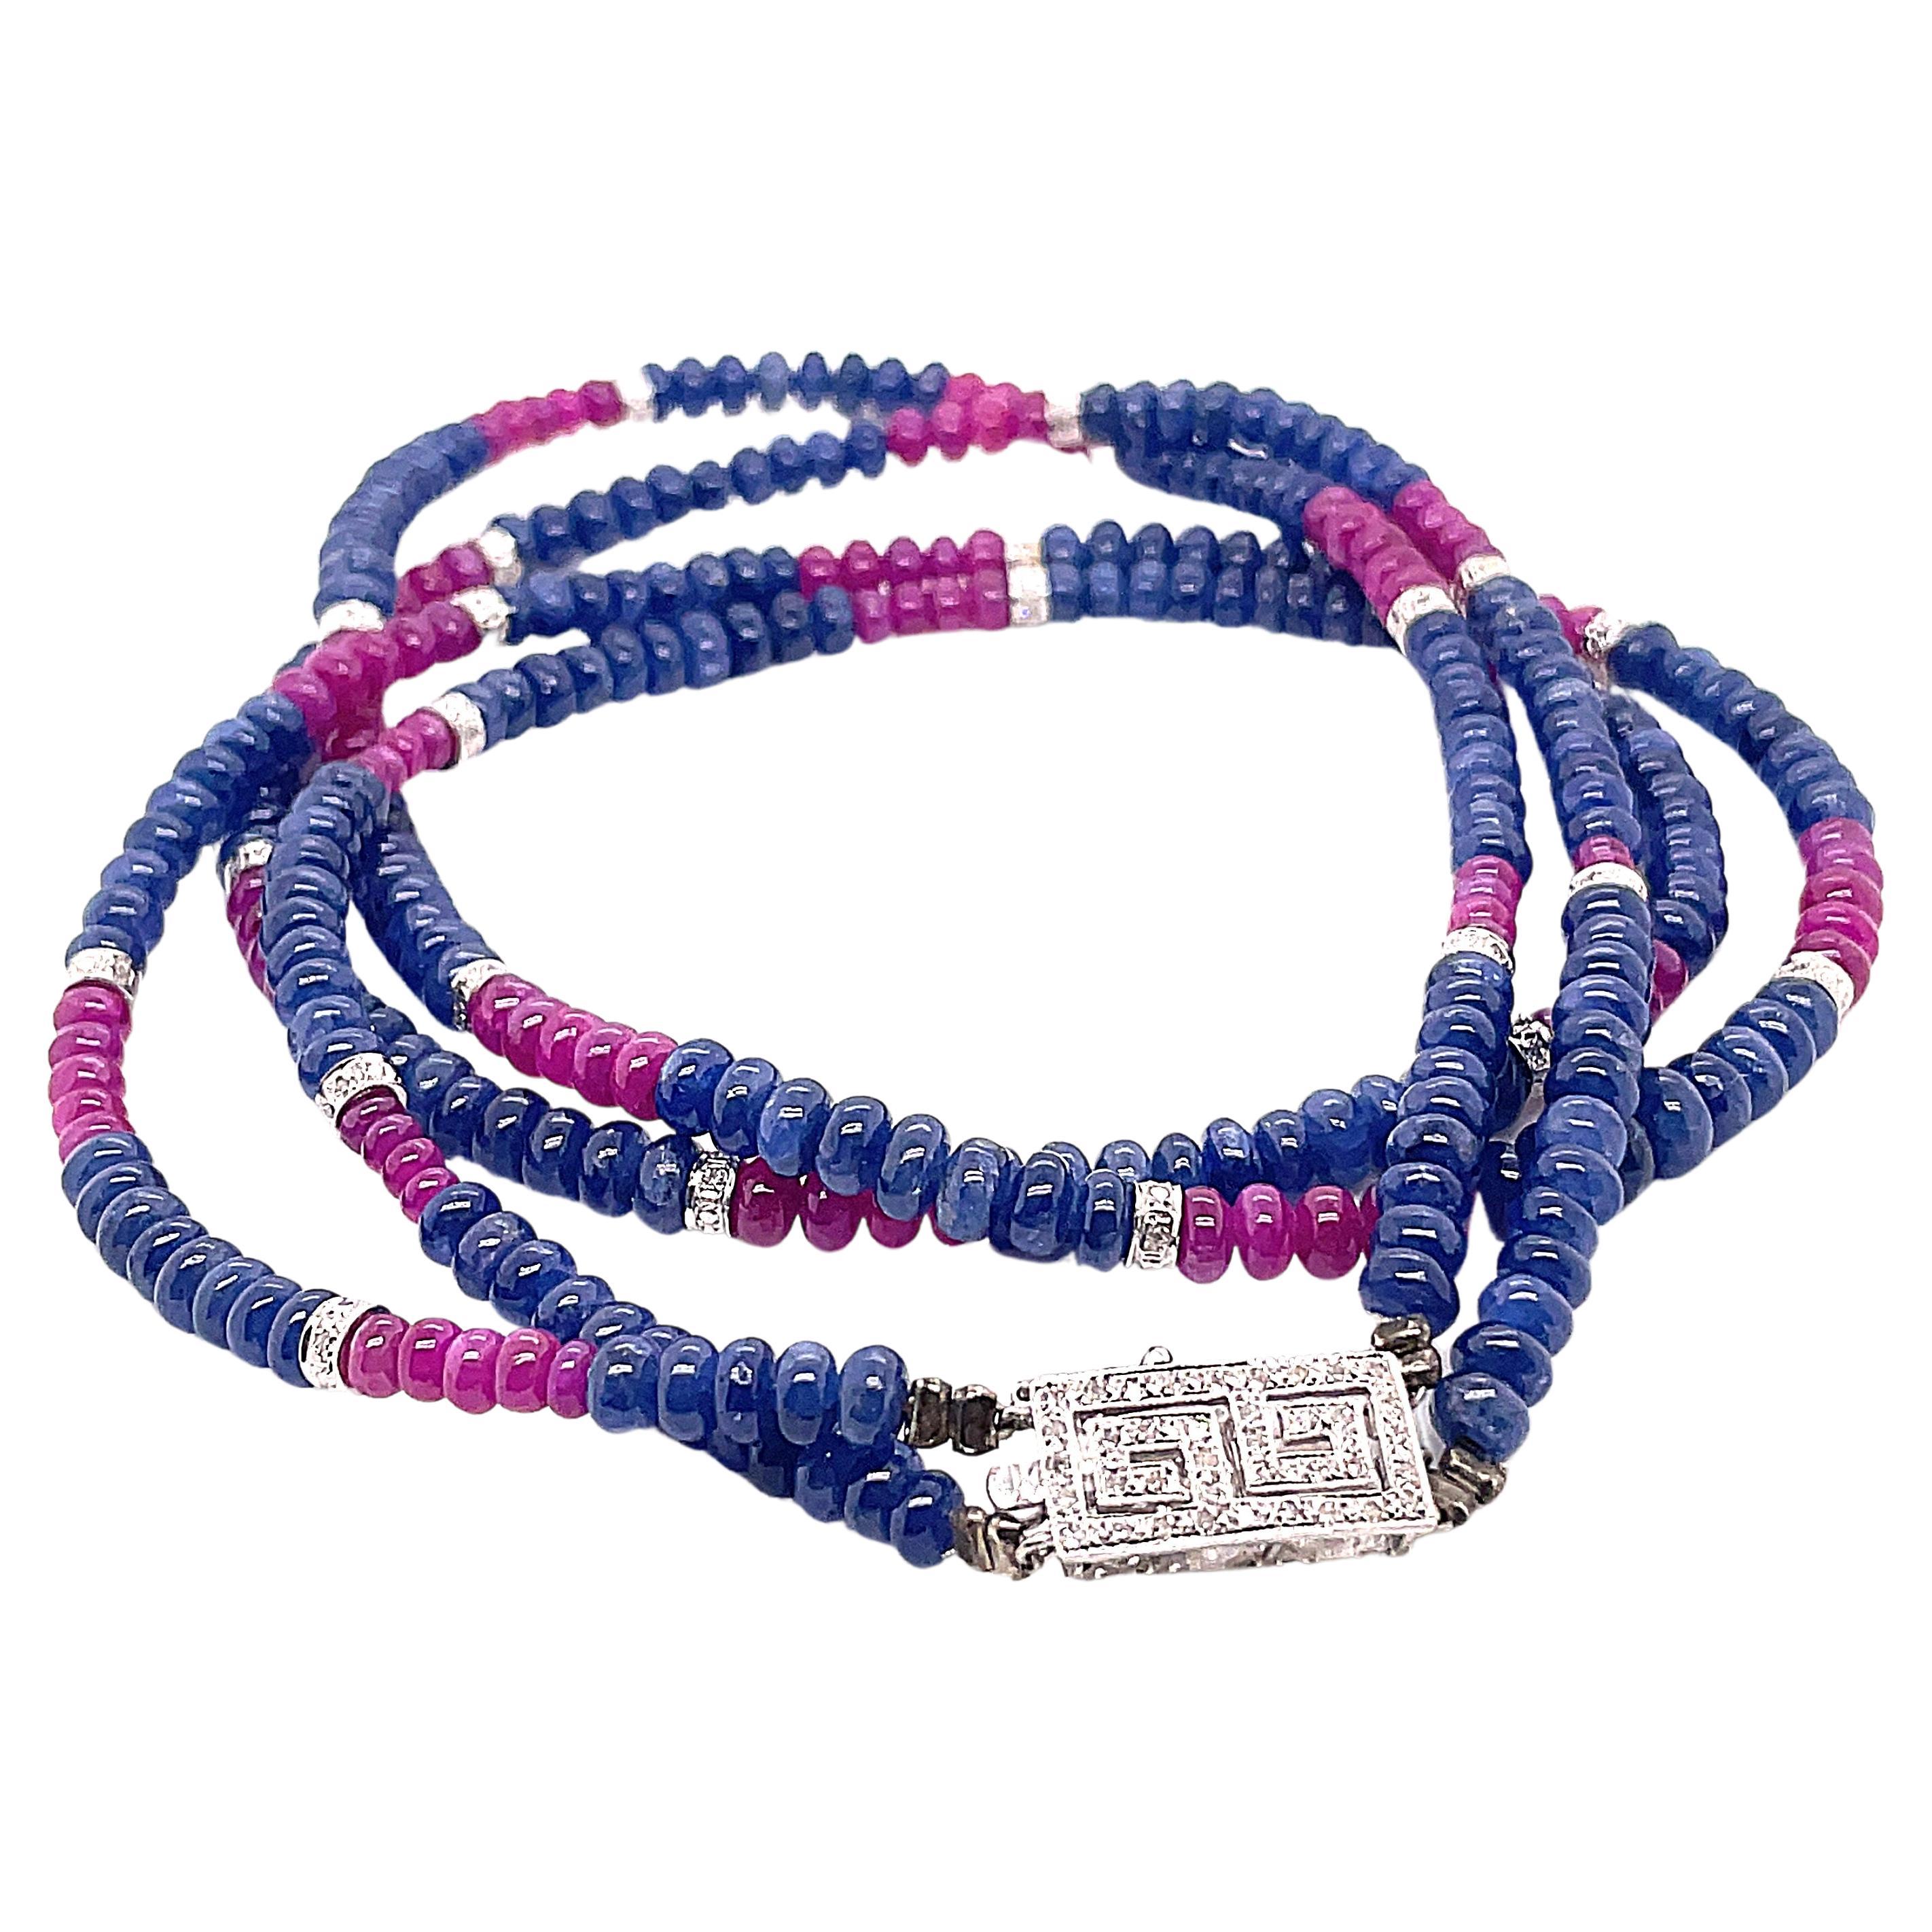 Burmese Ruby and Sapphire Beads White Diamond Gold Necklace